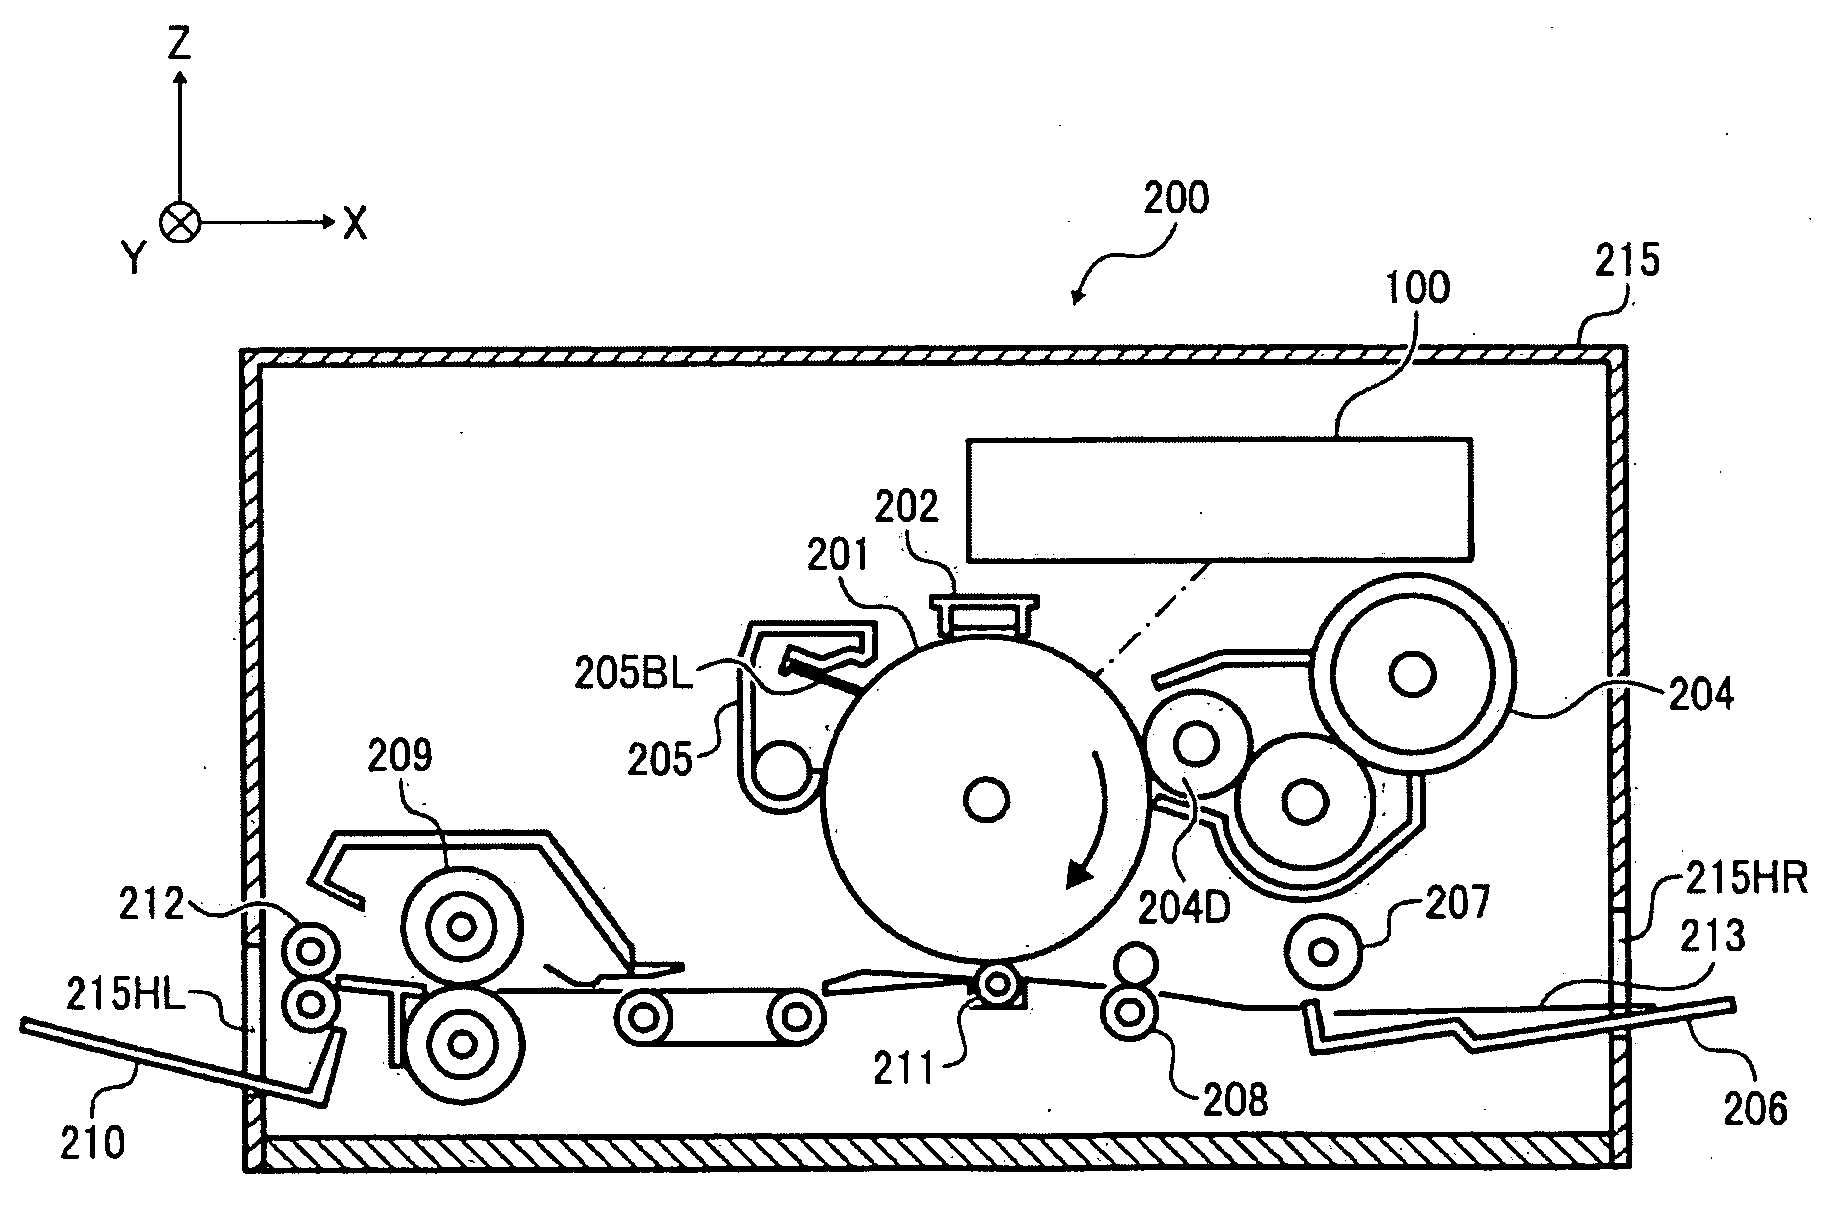 Optical scanning device and image forming apparatus